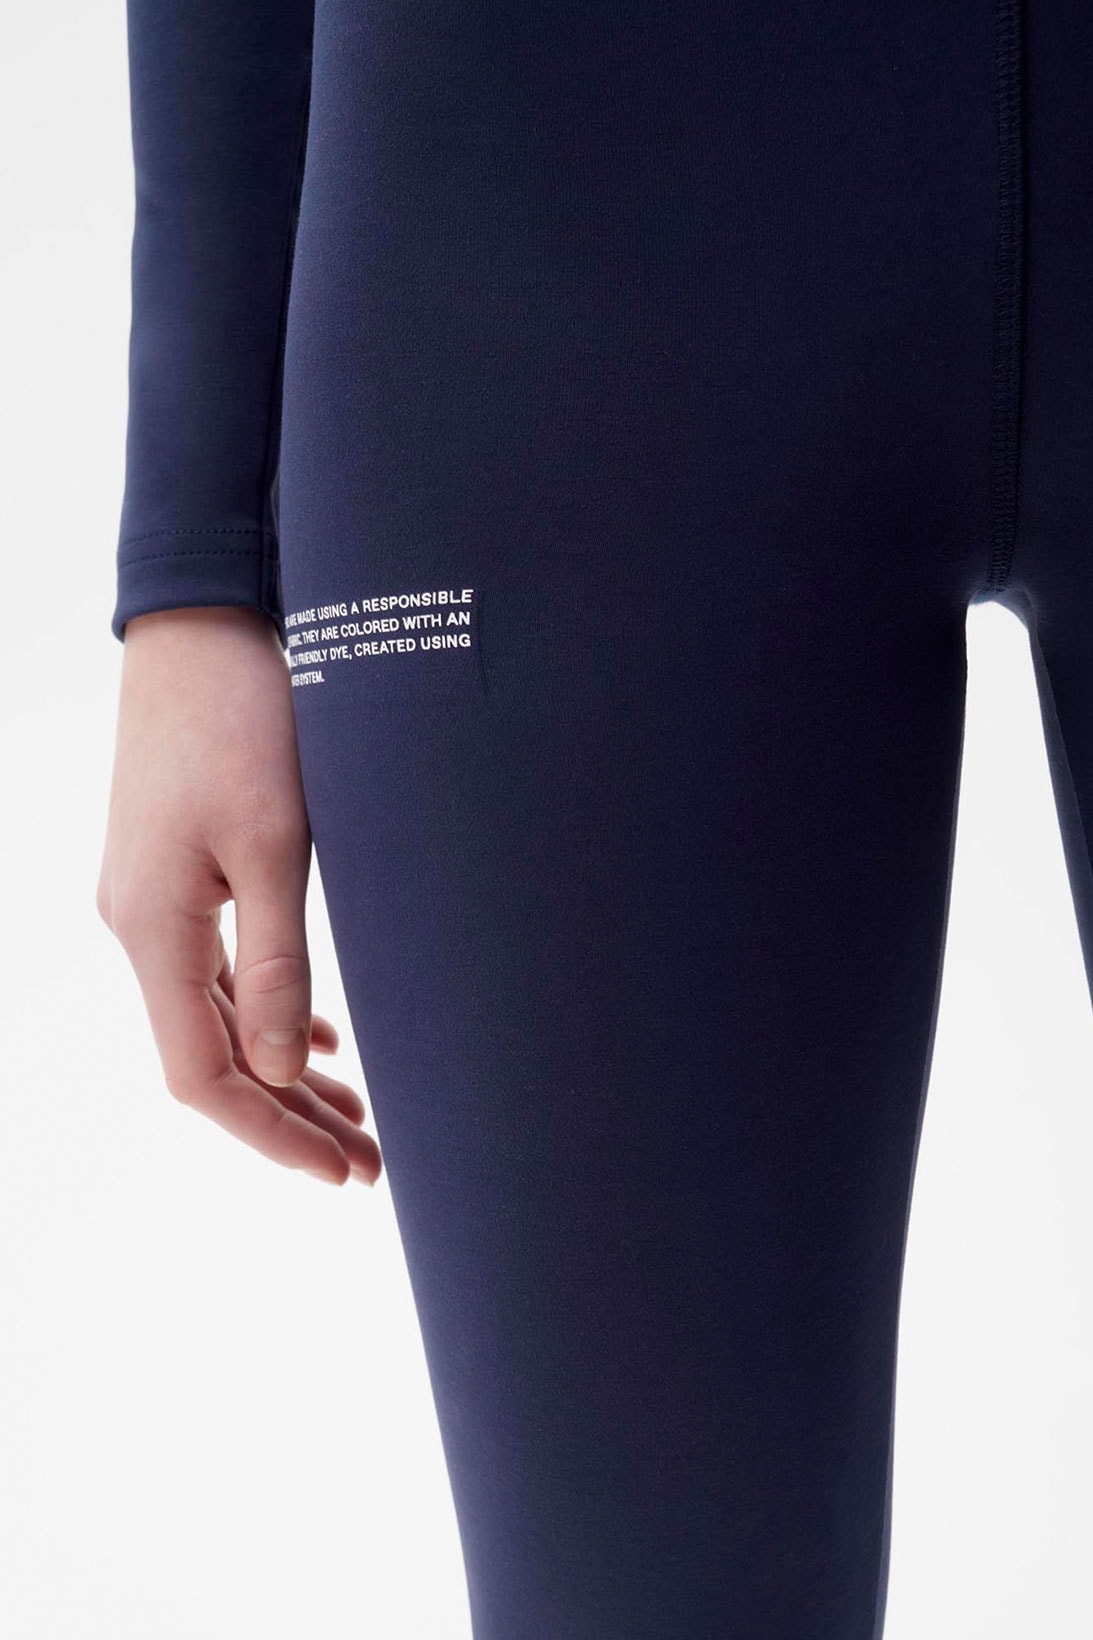 pangaia roica stretch athleisure sustainable collection turtleneck top leggings navy